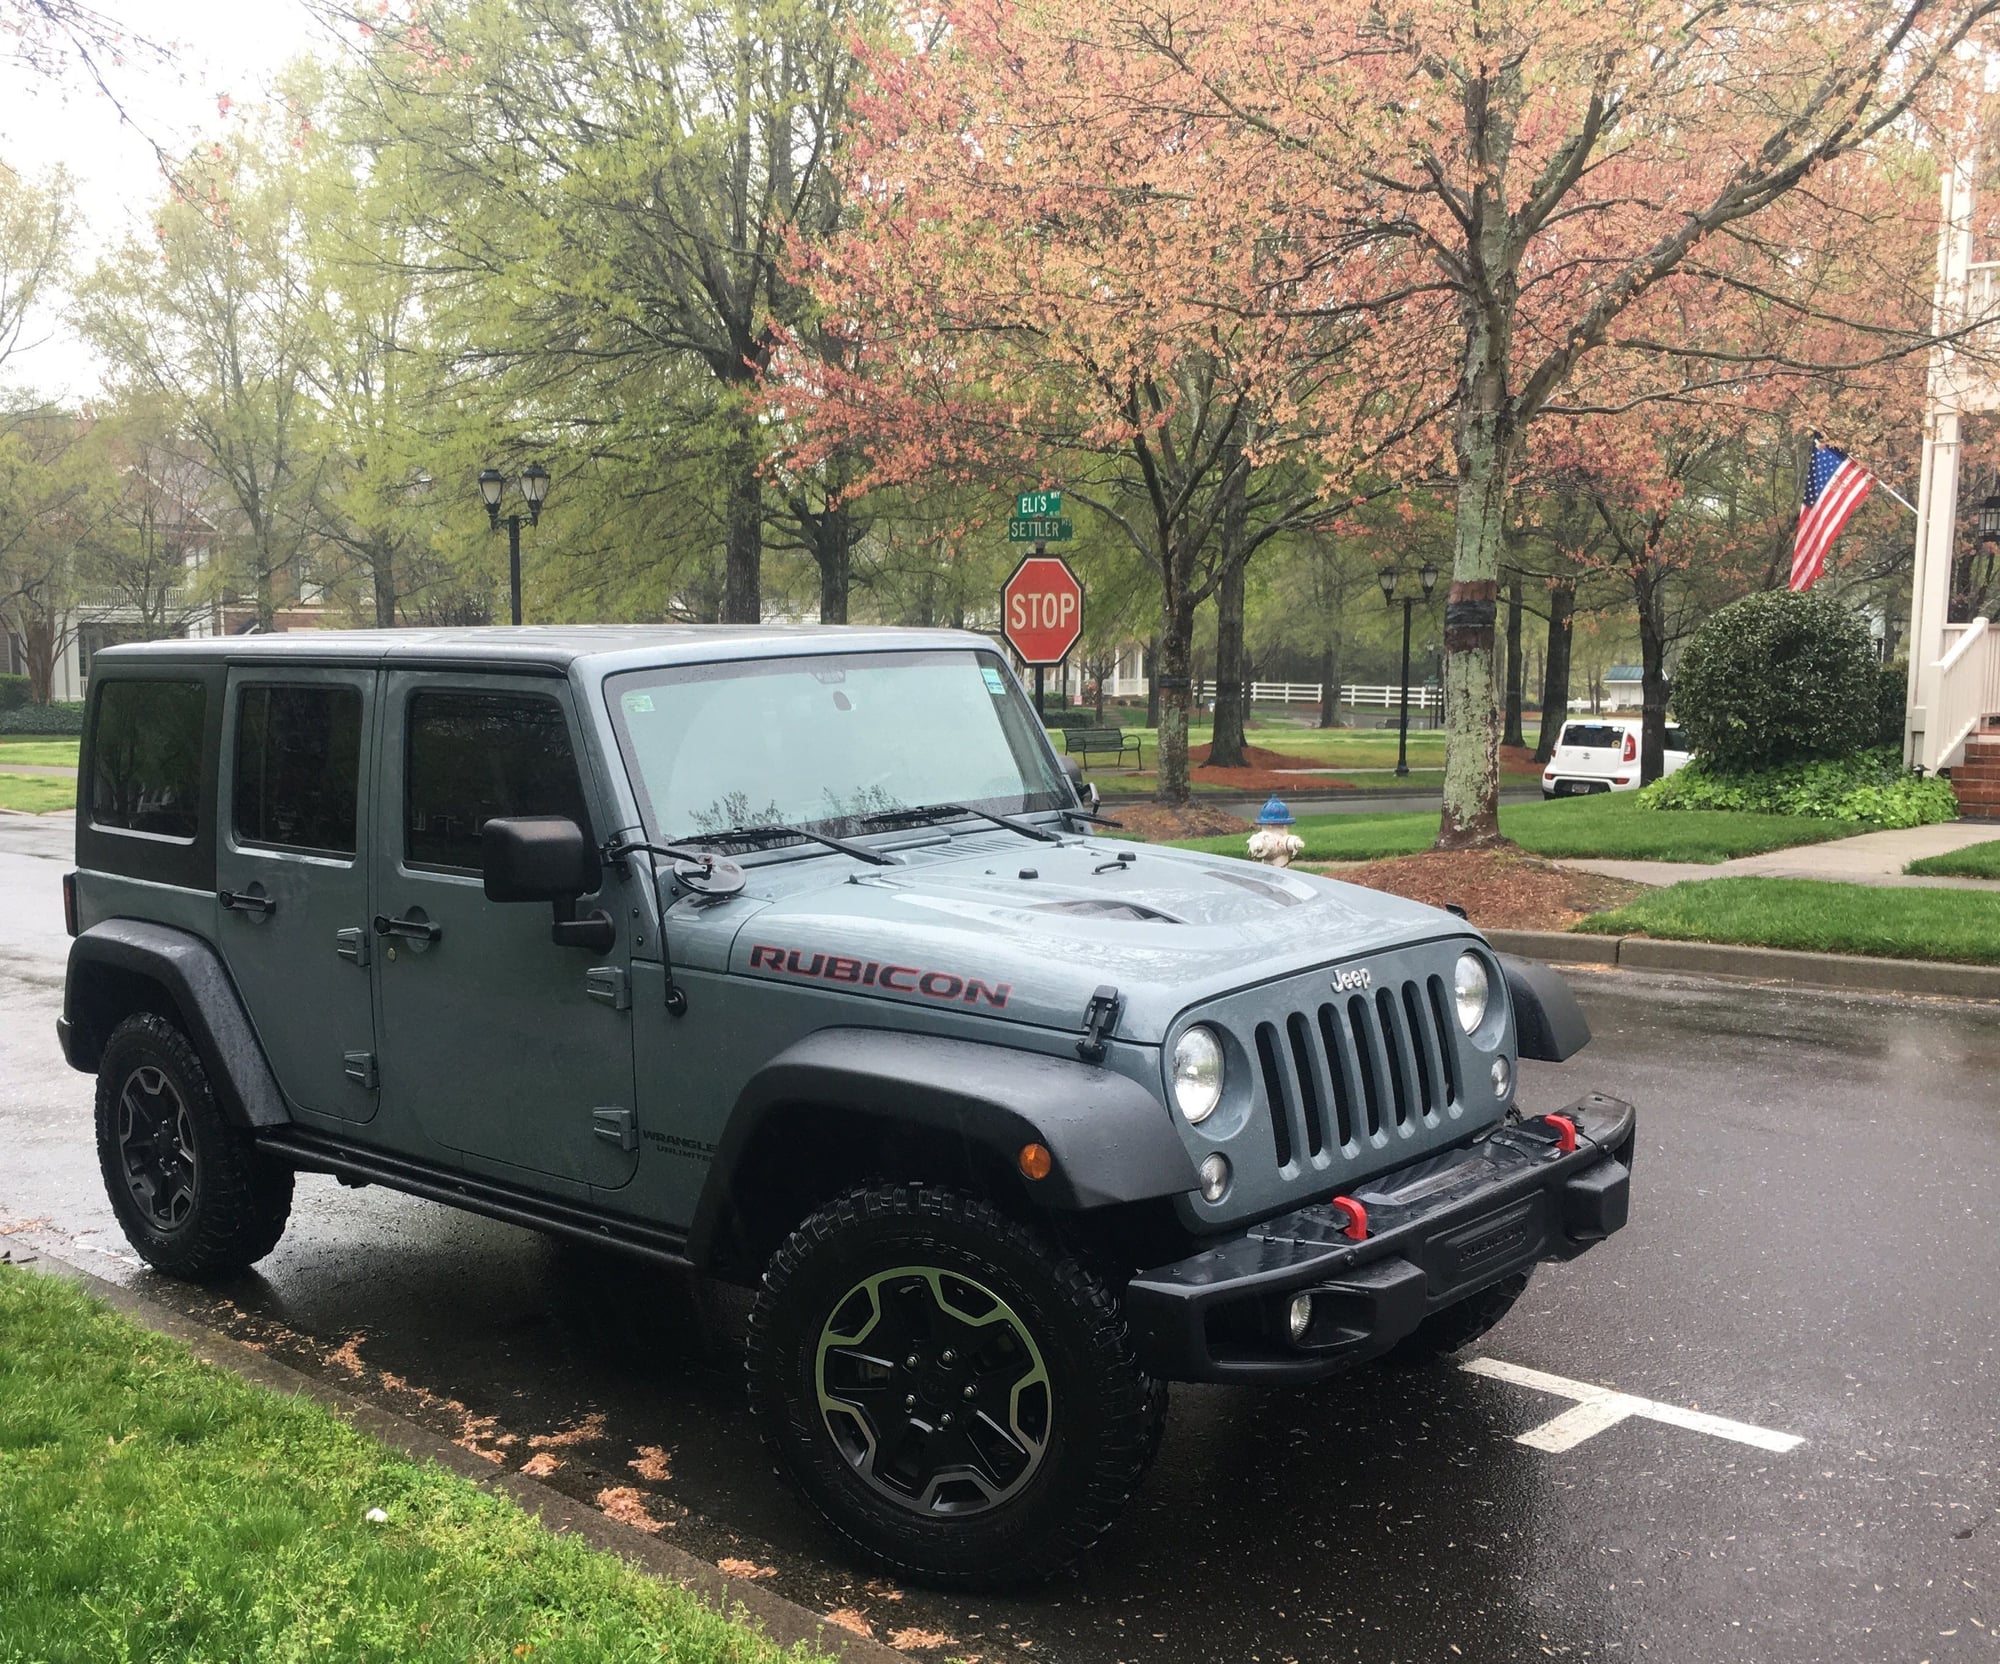 2015 Jeep  - 2015 Jeep Wrangler Unlimited Rubicon Hardrock Anvil Black 6 speed - Used - VIN 1C4BJWFG0FL655814 - 30,000 Miles - 6 cyl - 4WD - Manual - SUV - Gray - Fort Mill, SC 29708, United States